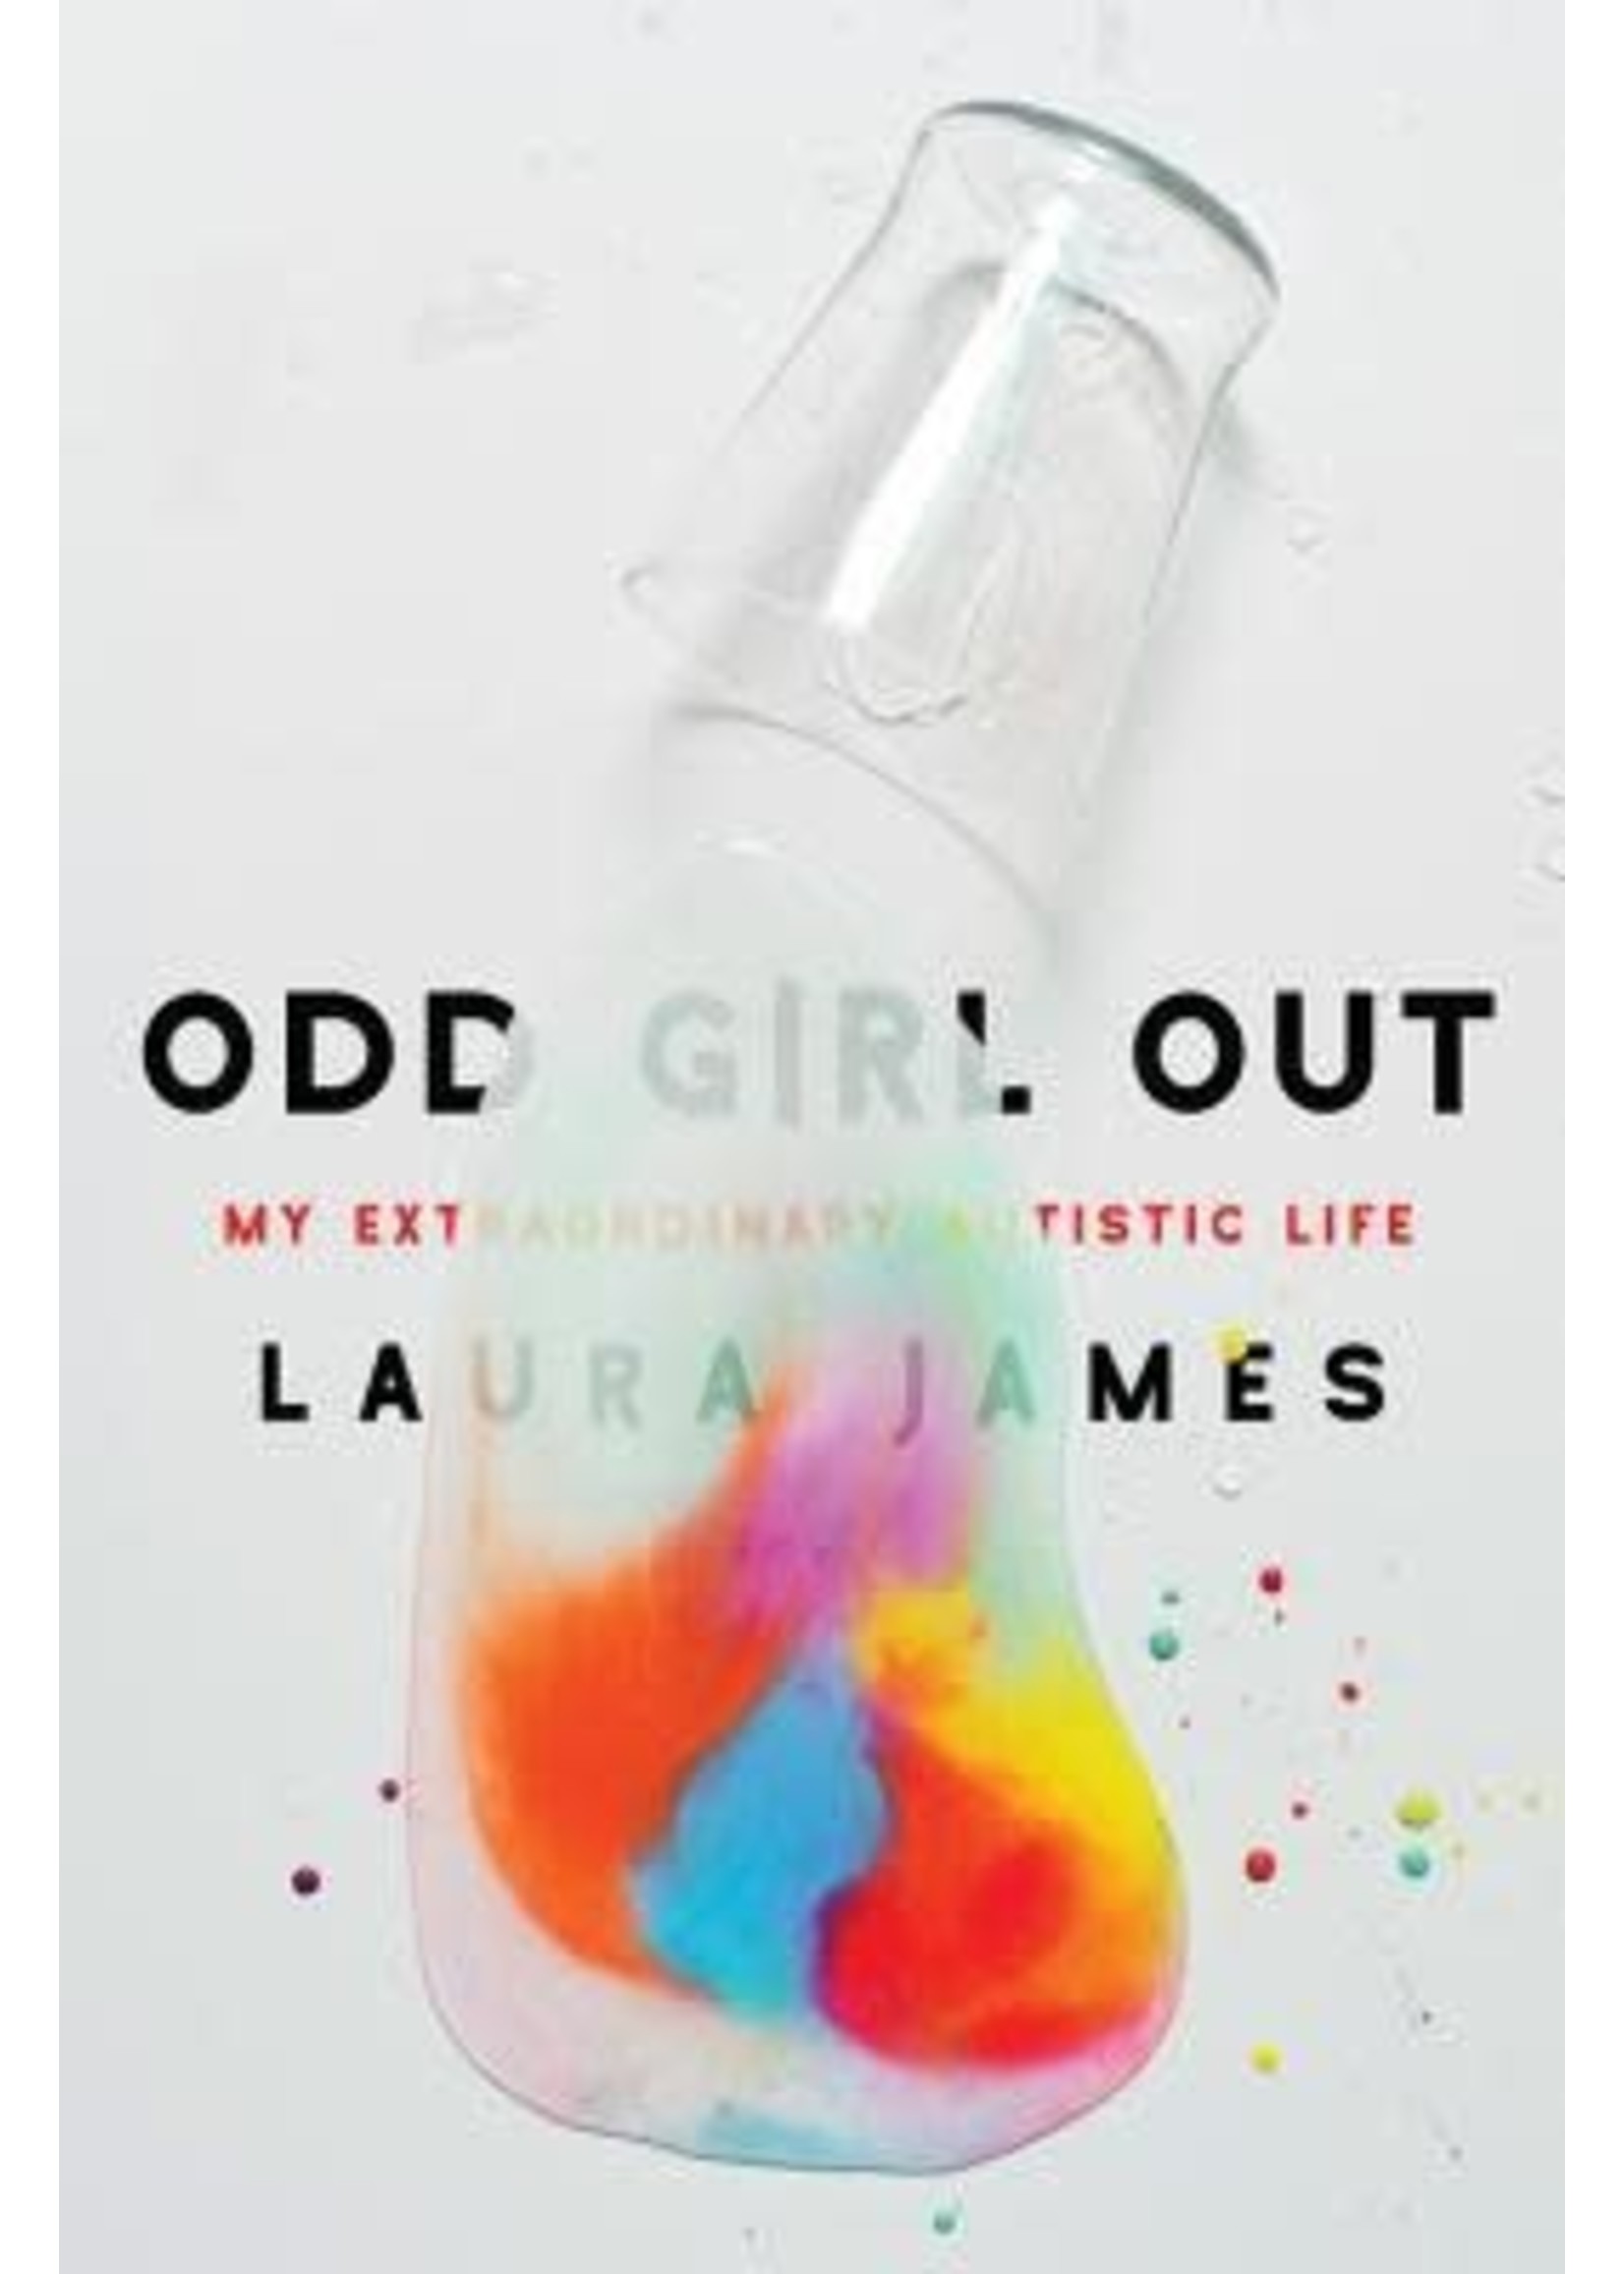 Odd Girl Out: My Extraordinary Autistic Life by Laura James